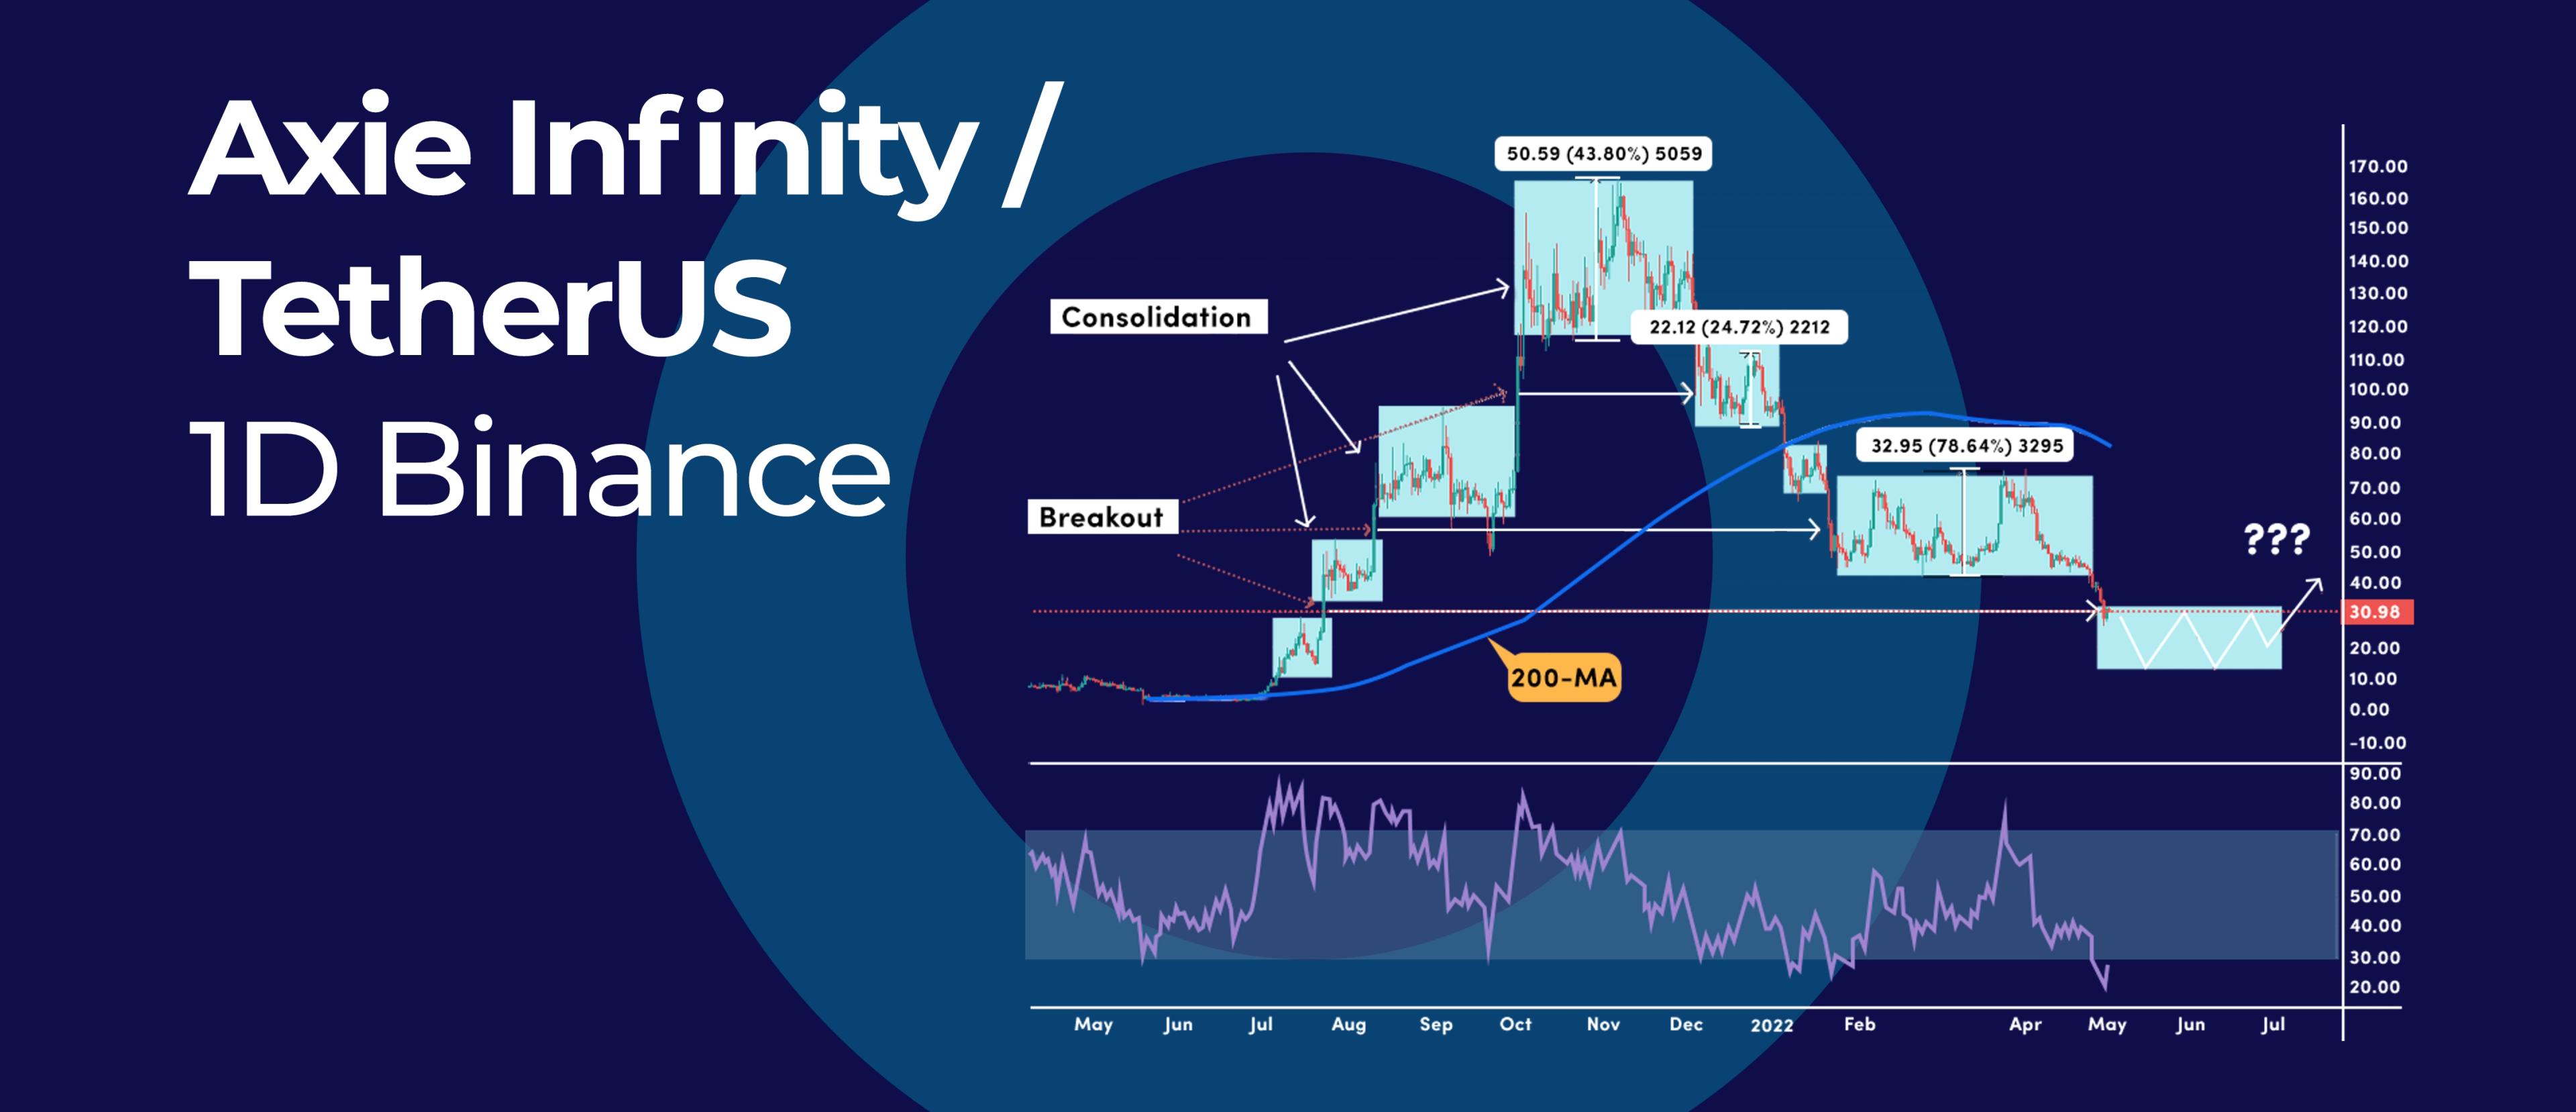 Axie Infinity: This Chart Pattern Calls for More Consolidation